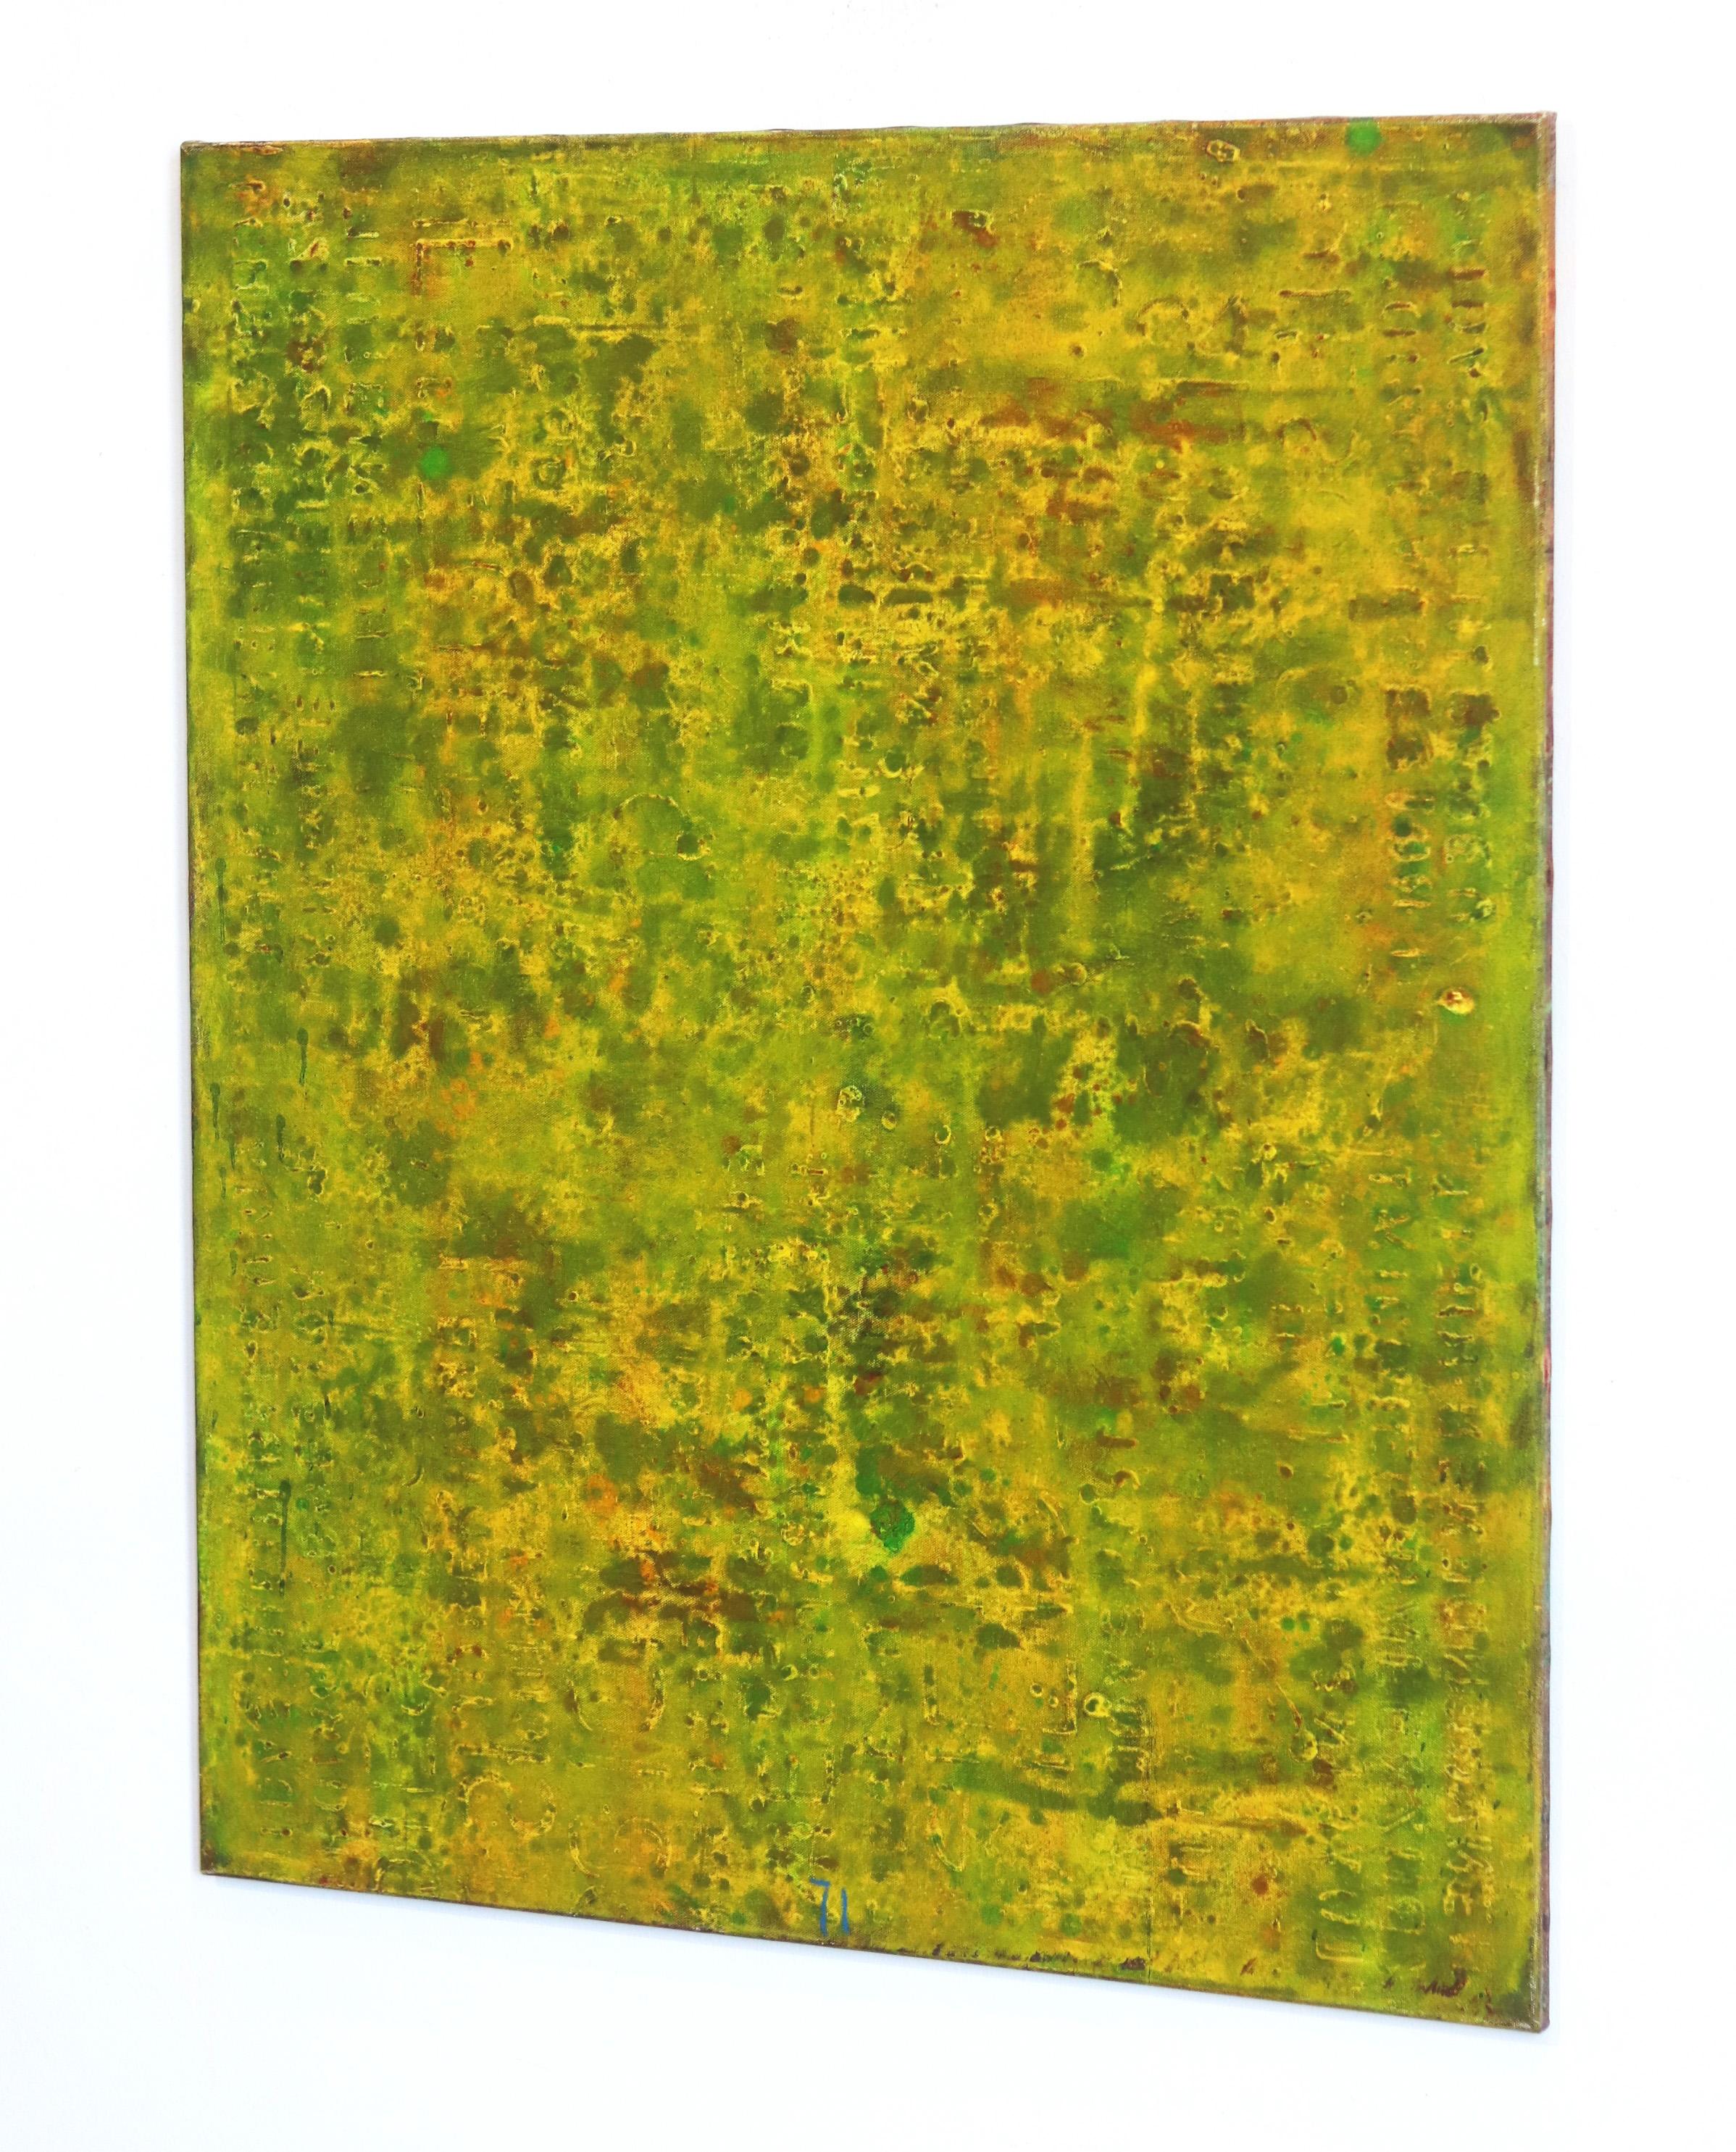 SE 33 - Original Abstract Expressionist Yellow Colorfield Oil Painting - Minimalist Mixed Media Art by Bernhard Zimmer